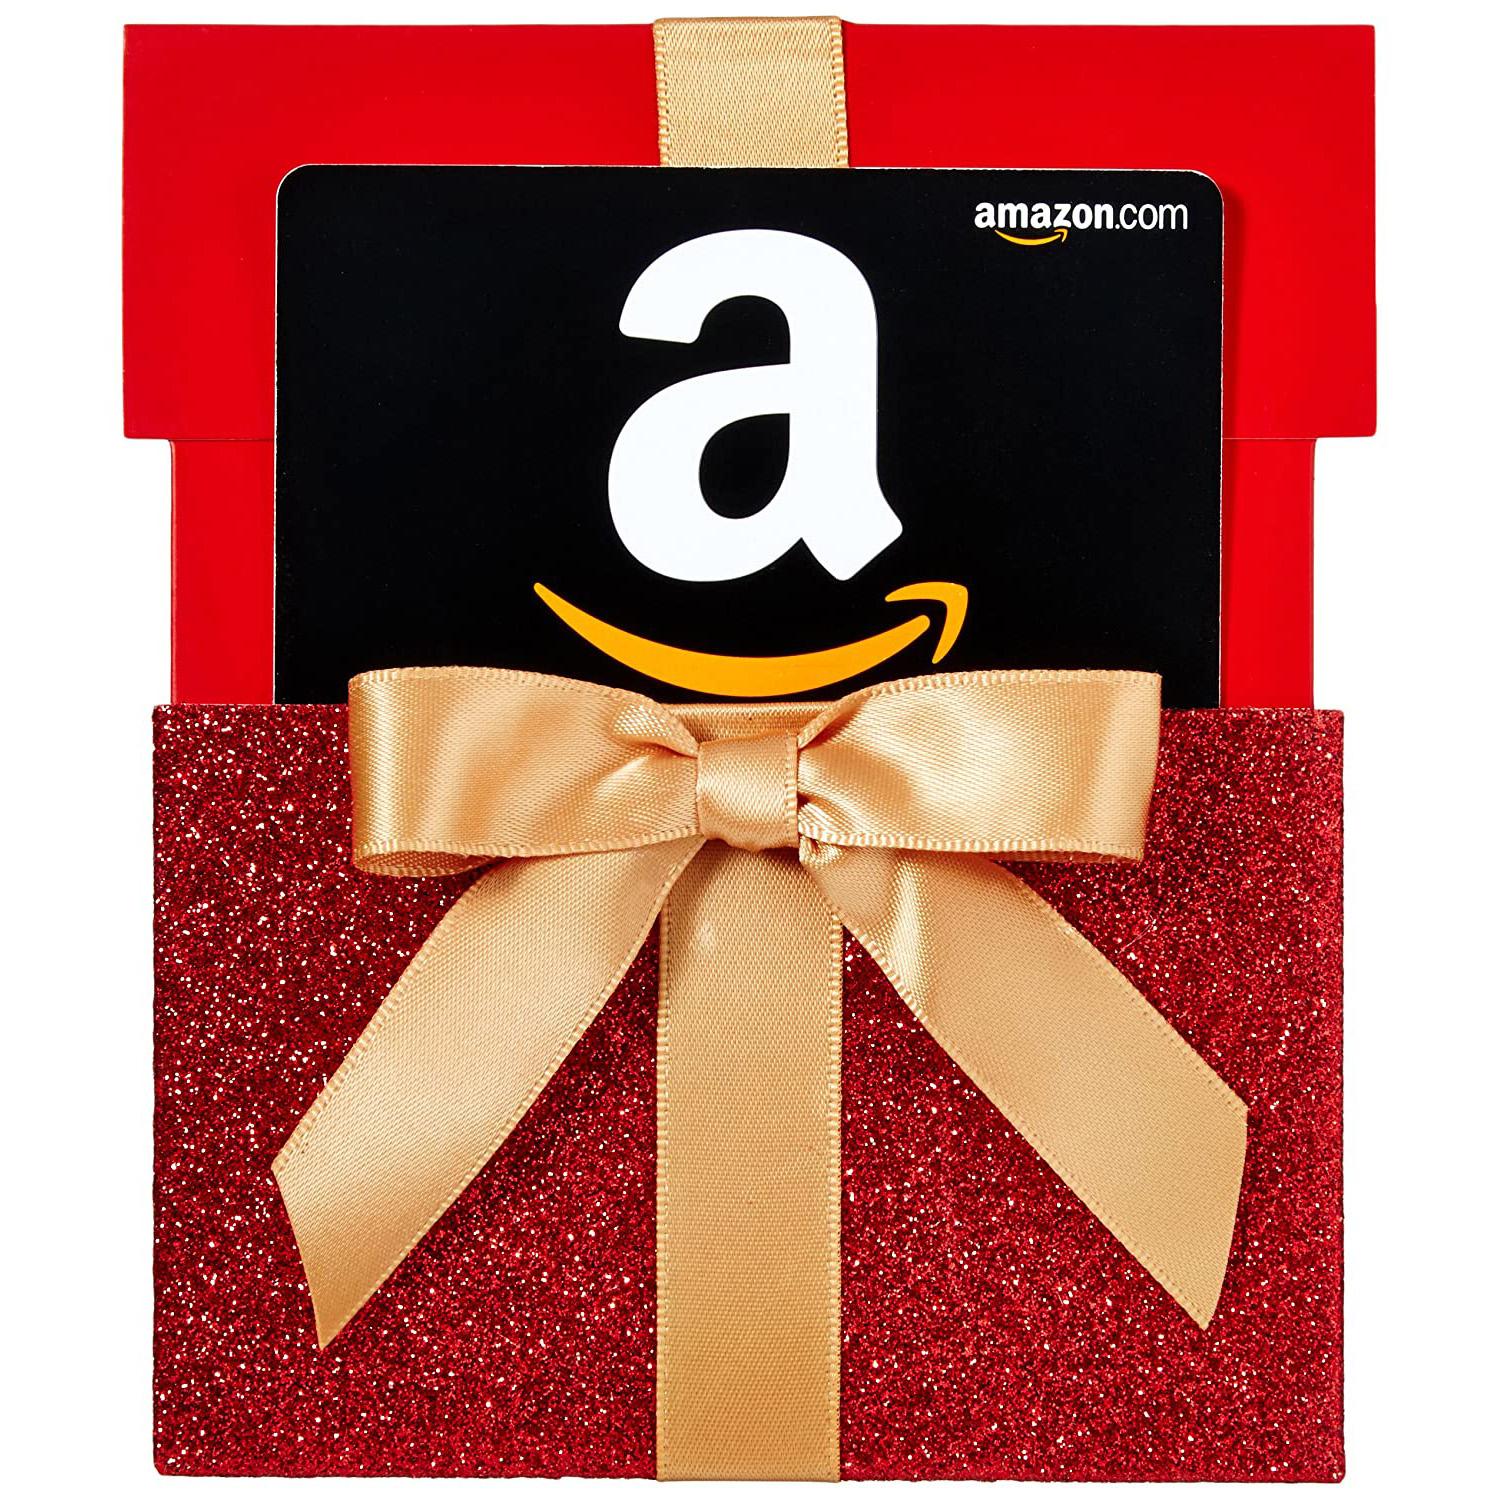 $20 Amazon Gift Card for $15